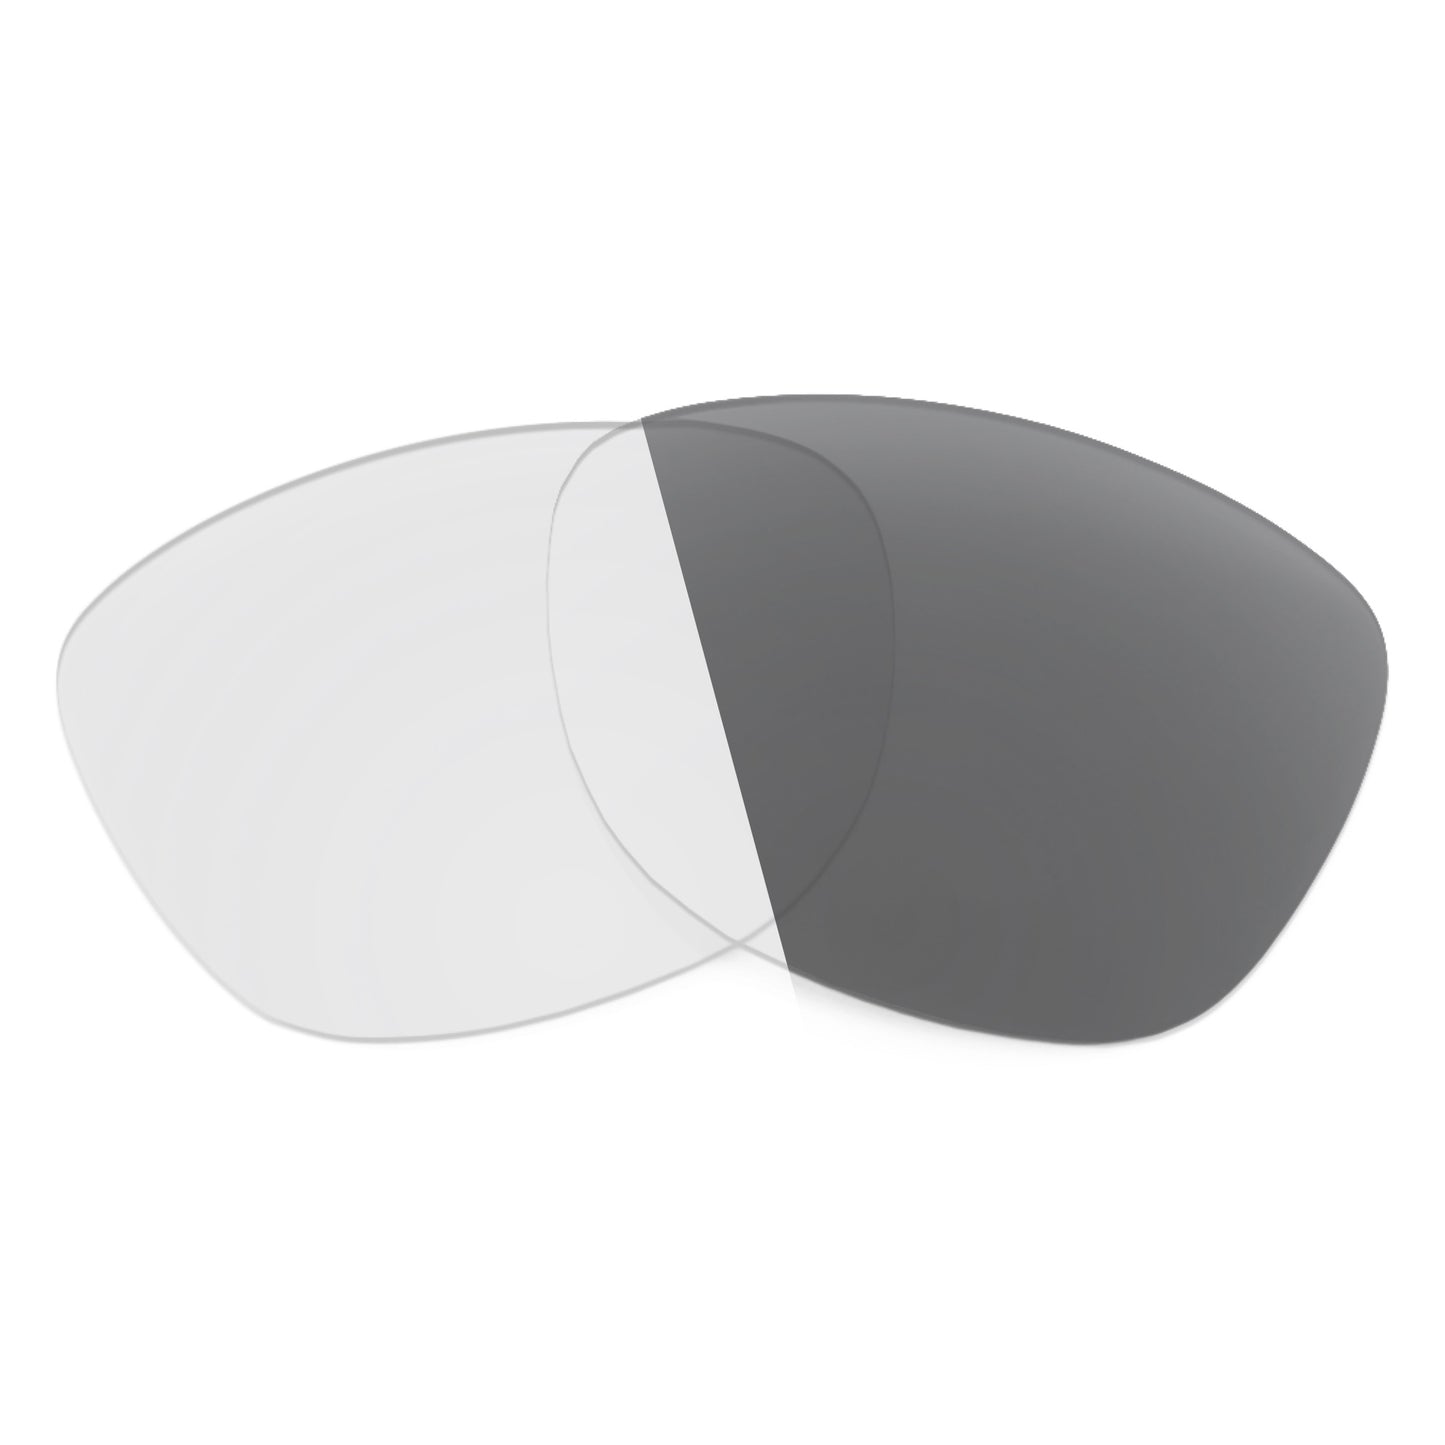 Revant replacement lenses for Oakley Manorburn Non-Polarized Adapt Gray Photochromic